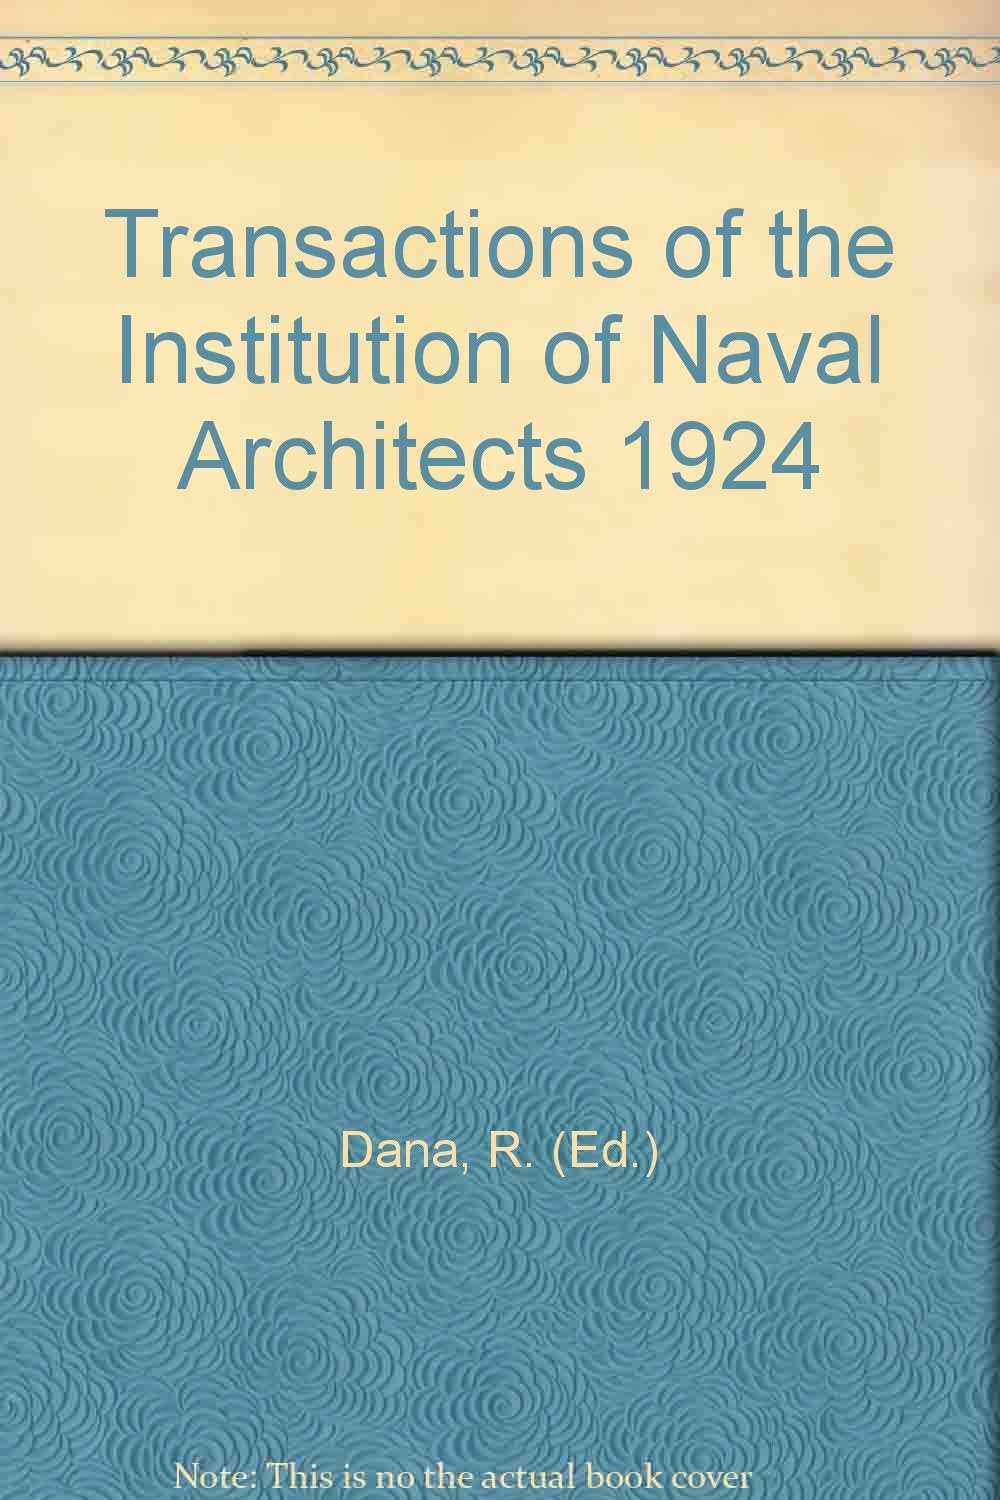 Transactions of the Institution of Naval Architects 1924 [Hardcover] Dana, R. (Ed.)